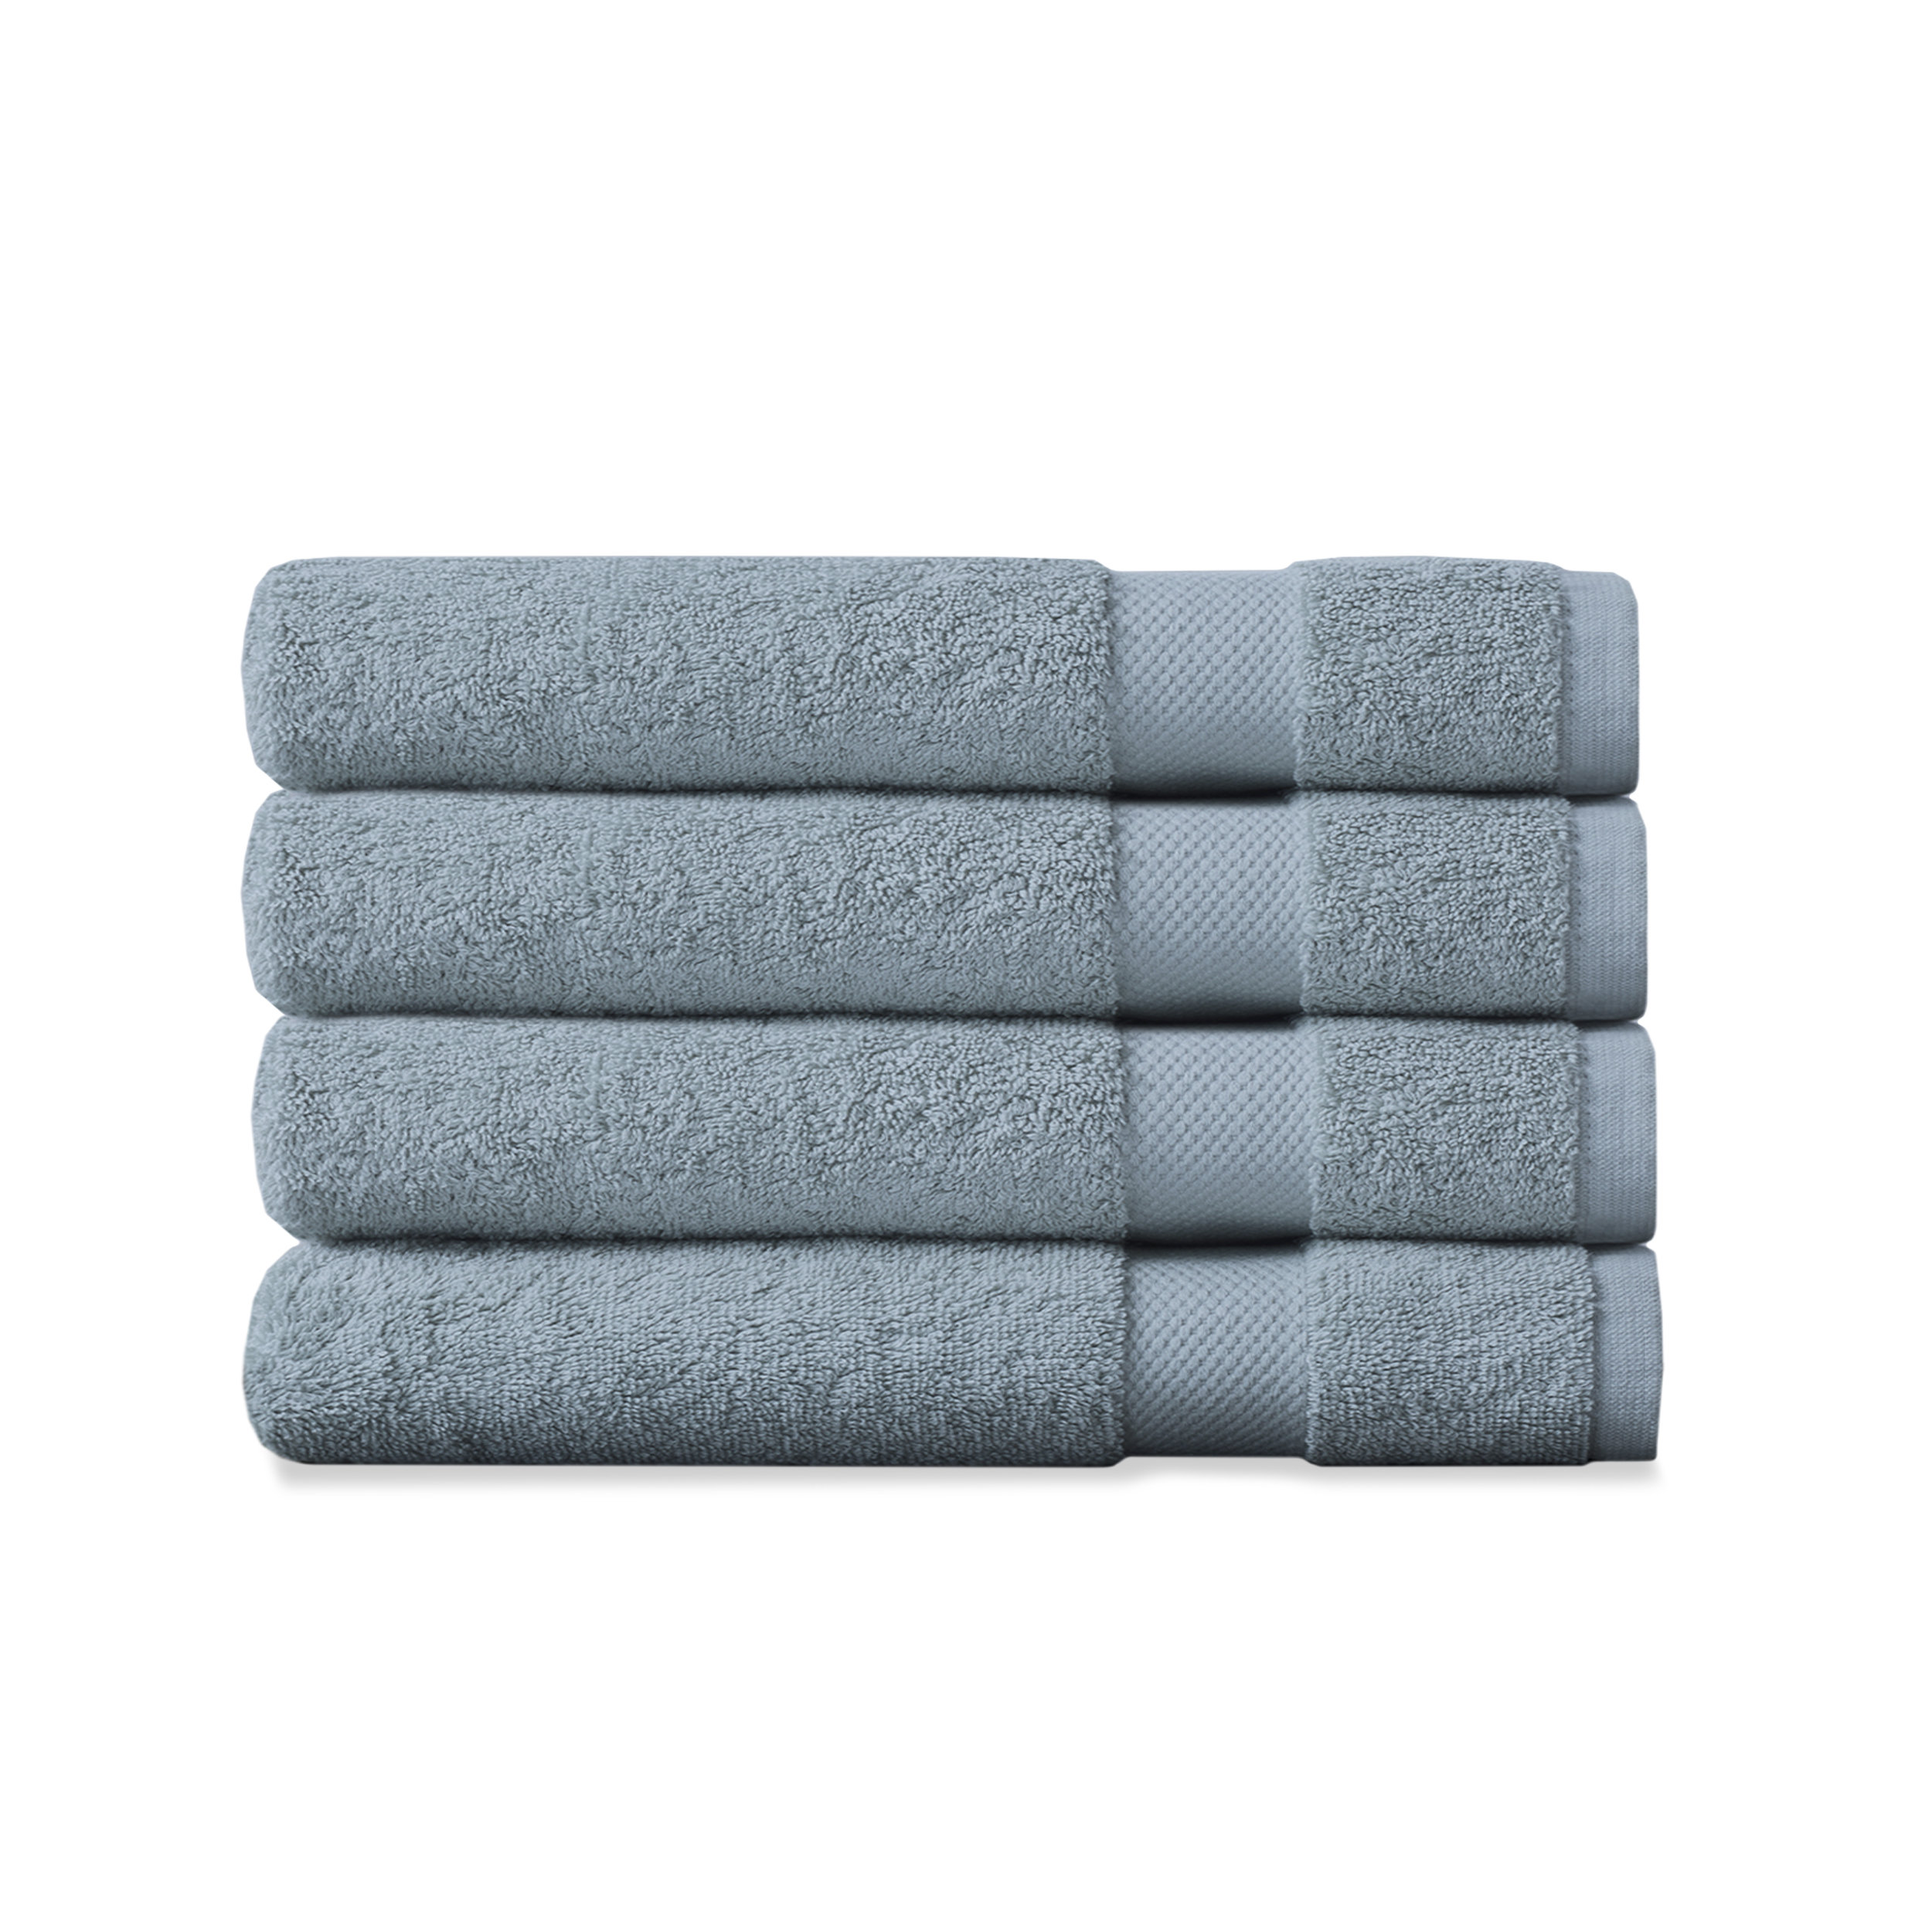 Luxury 100% Cotton Bath Sheet - Extra Large Size, Very Soft & Fluffy, Quick  Dry & Highly Absorbent, Gray - 33 x 70